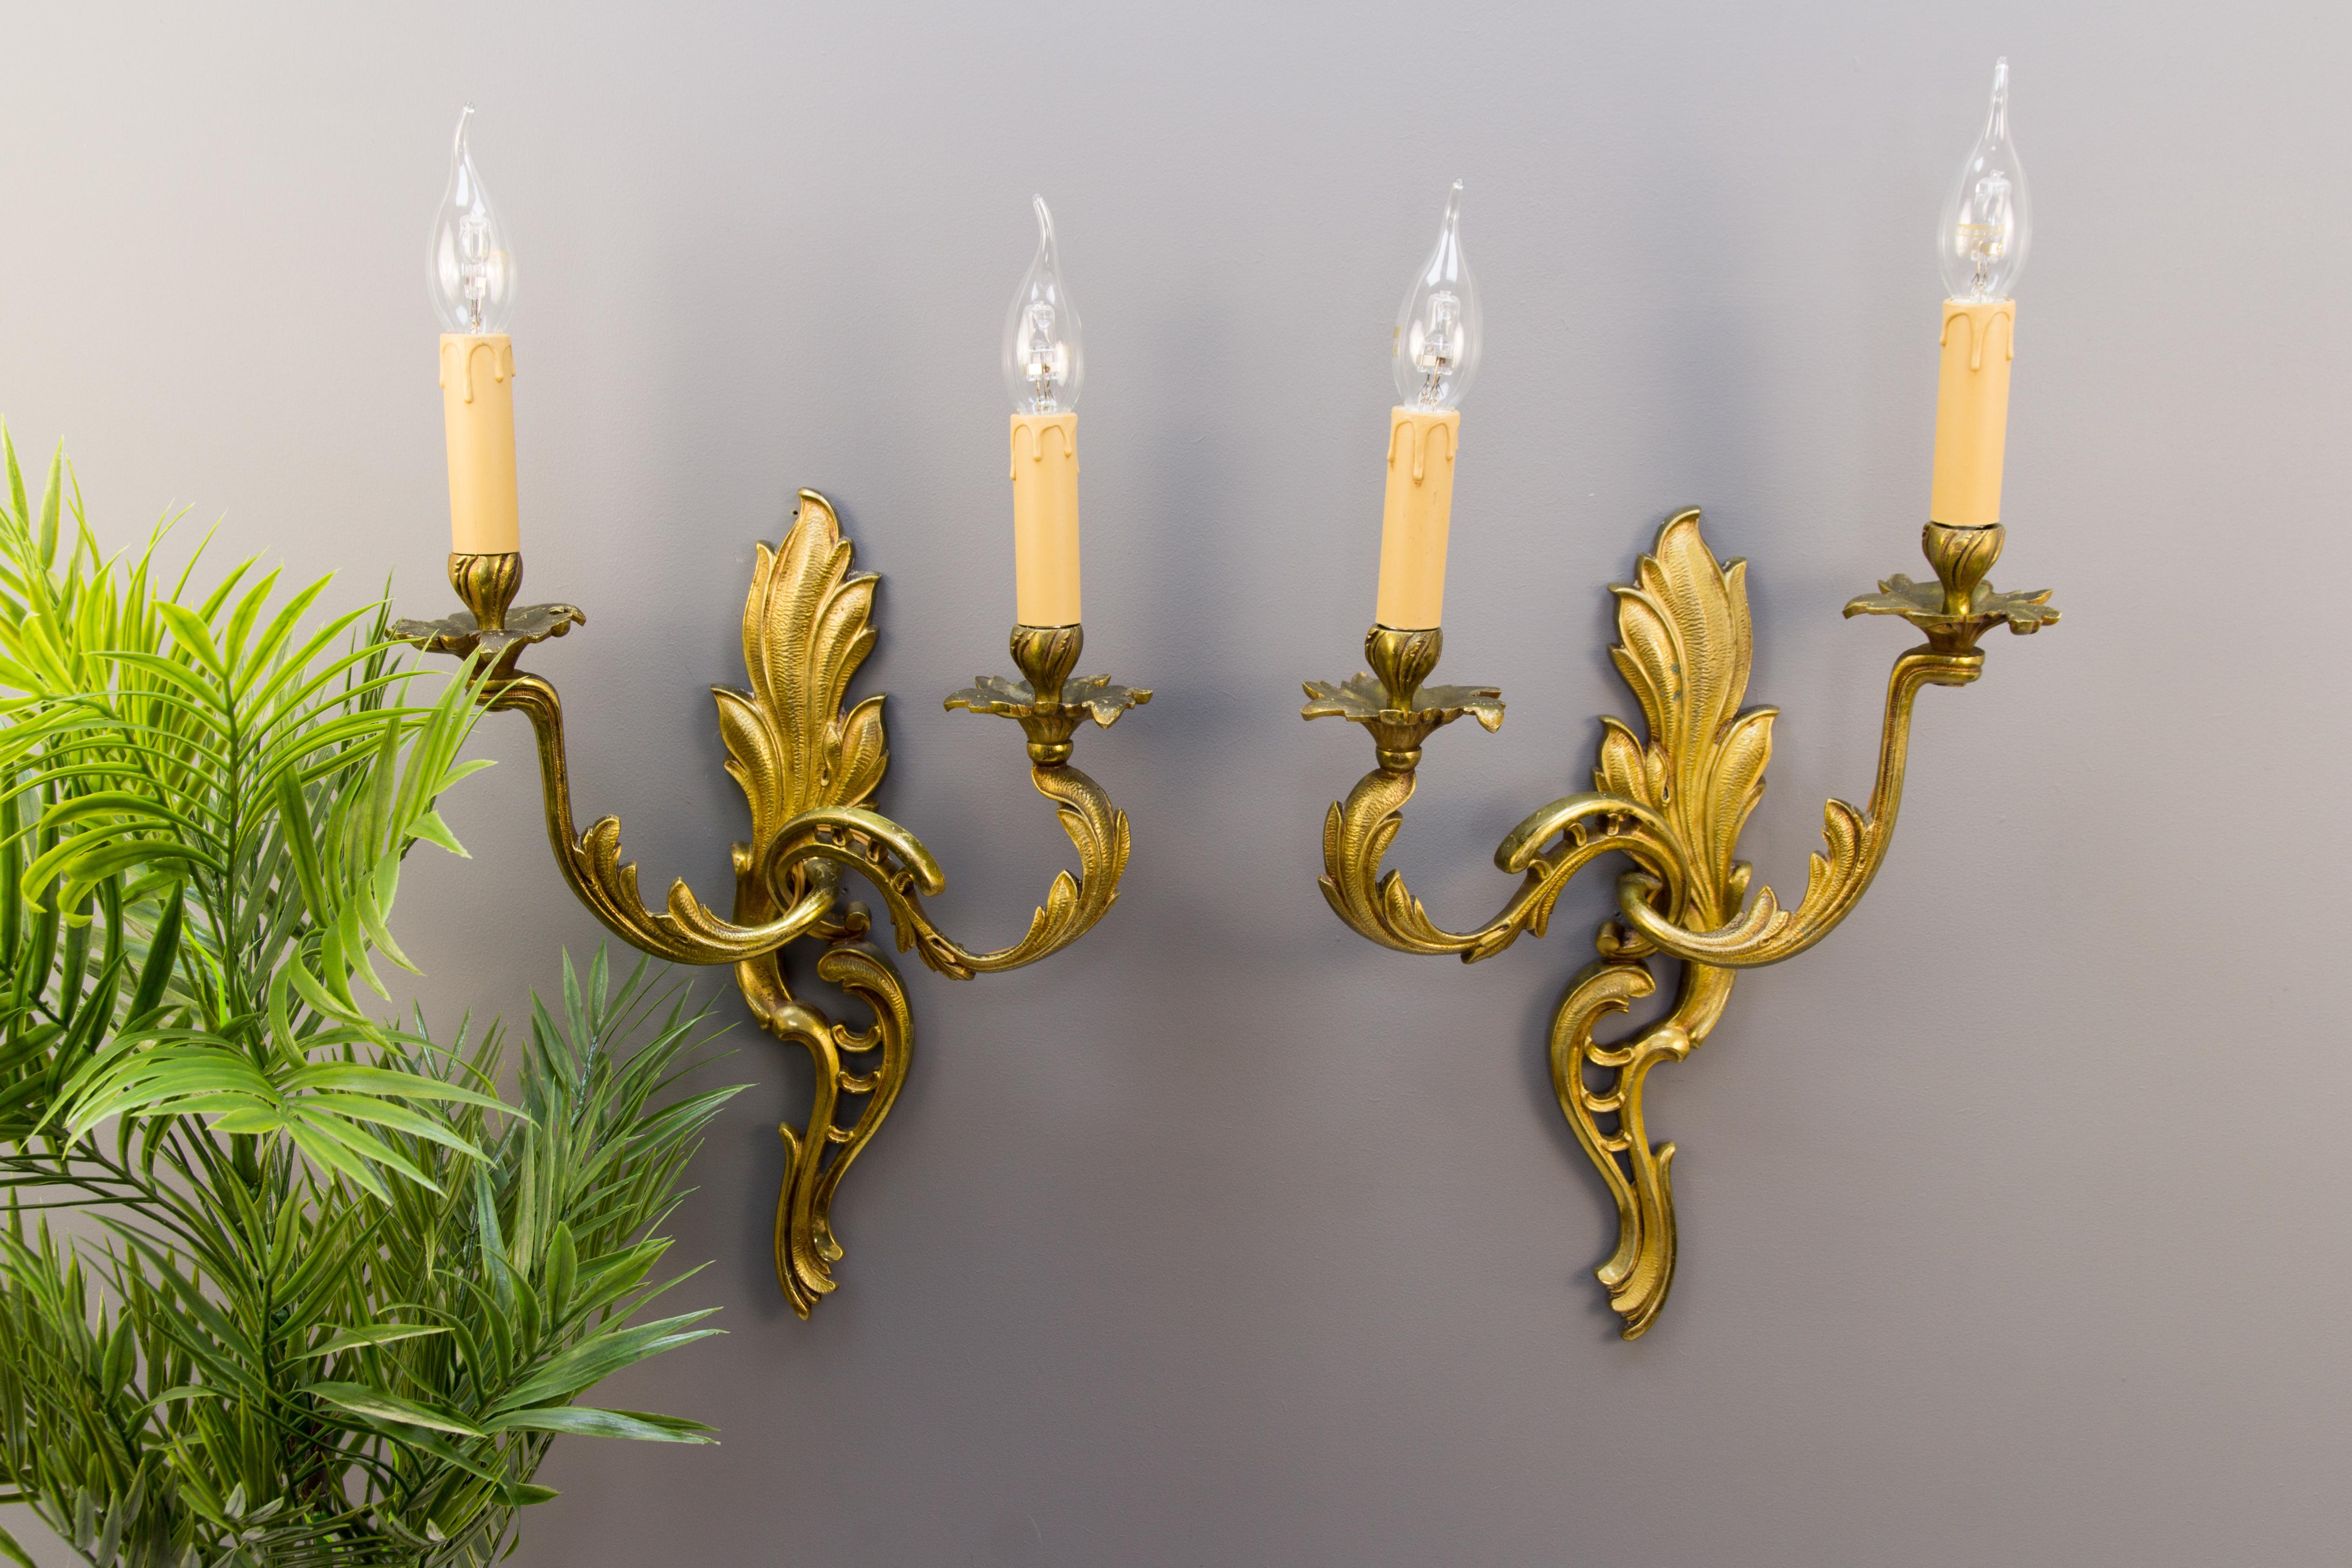 Pair of Louis XV French Rococo style two-arm sconces. Curvy asymmetrical acanthus leaf-like bronze scrolls in Classic French Rococo style. Each arm has sockets for E14 size light bulbs, France, circa the 1930s.
Dimensions (each sconce without light